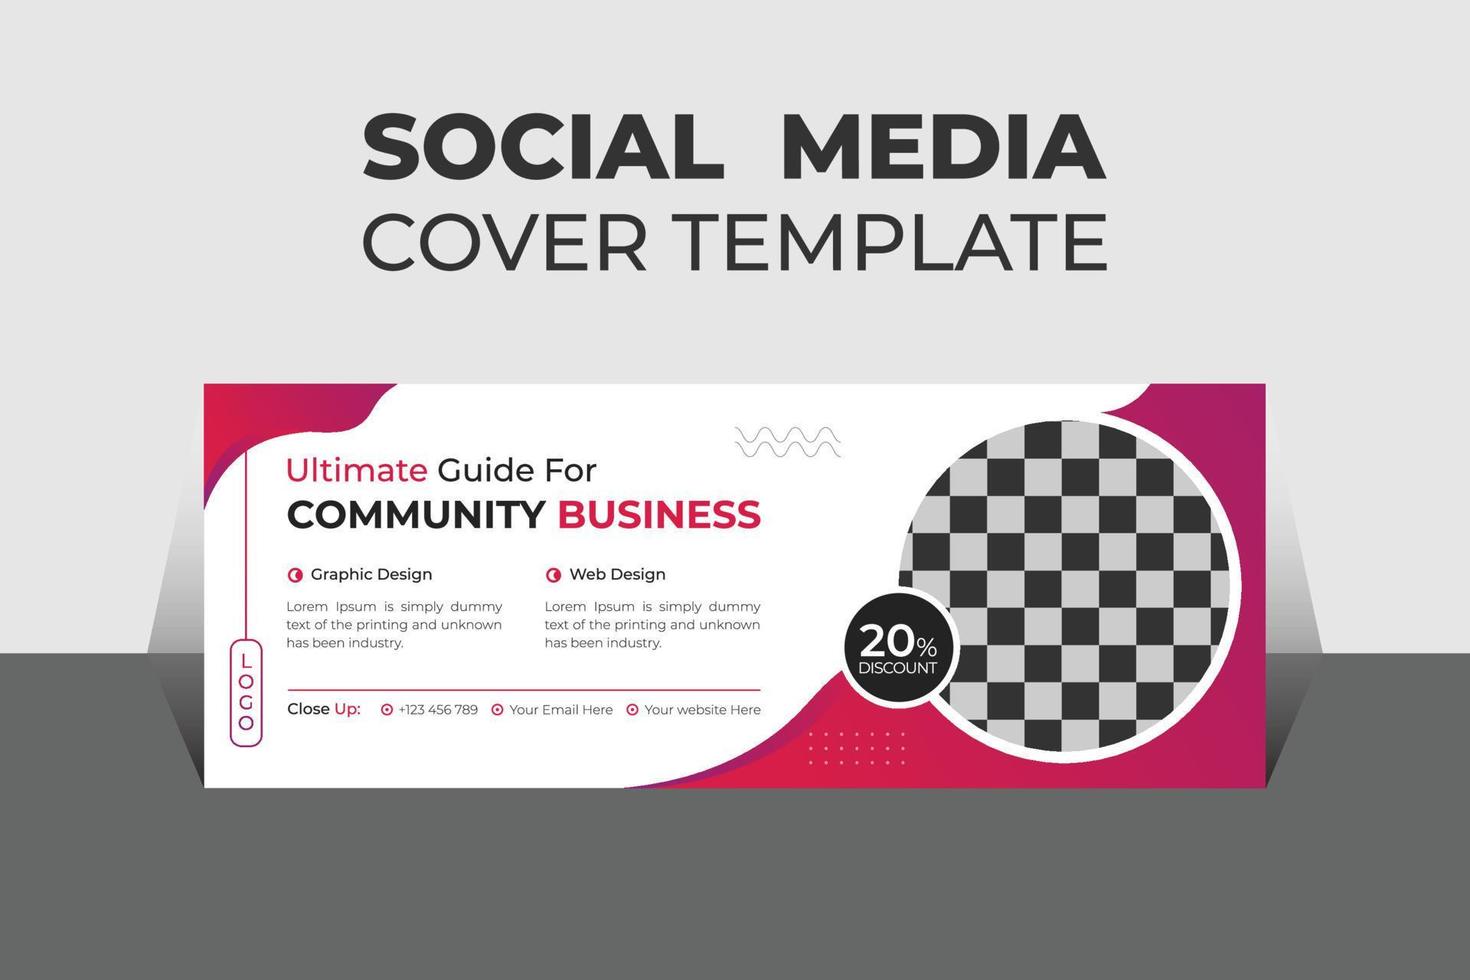 Creative Corporate Business Social Media Cover Design Template, Banner Template and Web Banner Template Design. vector